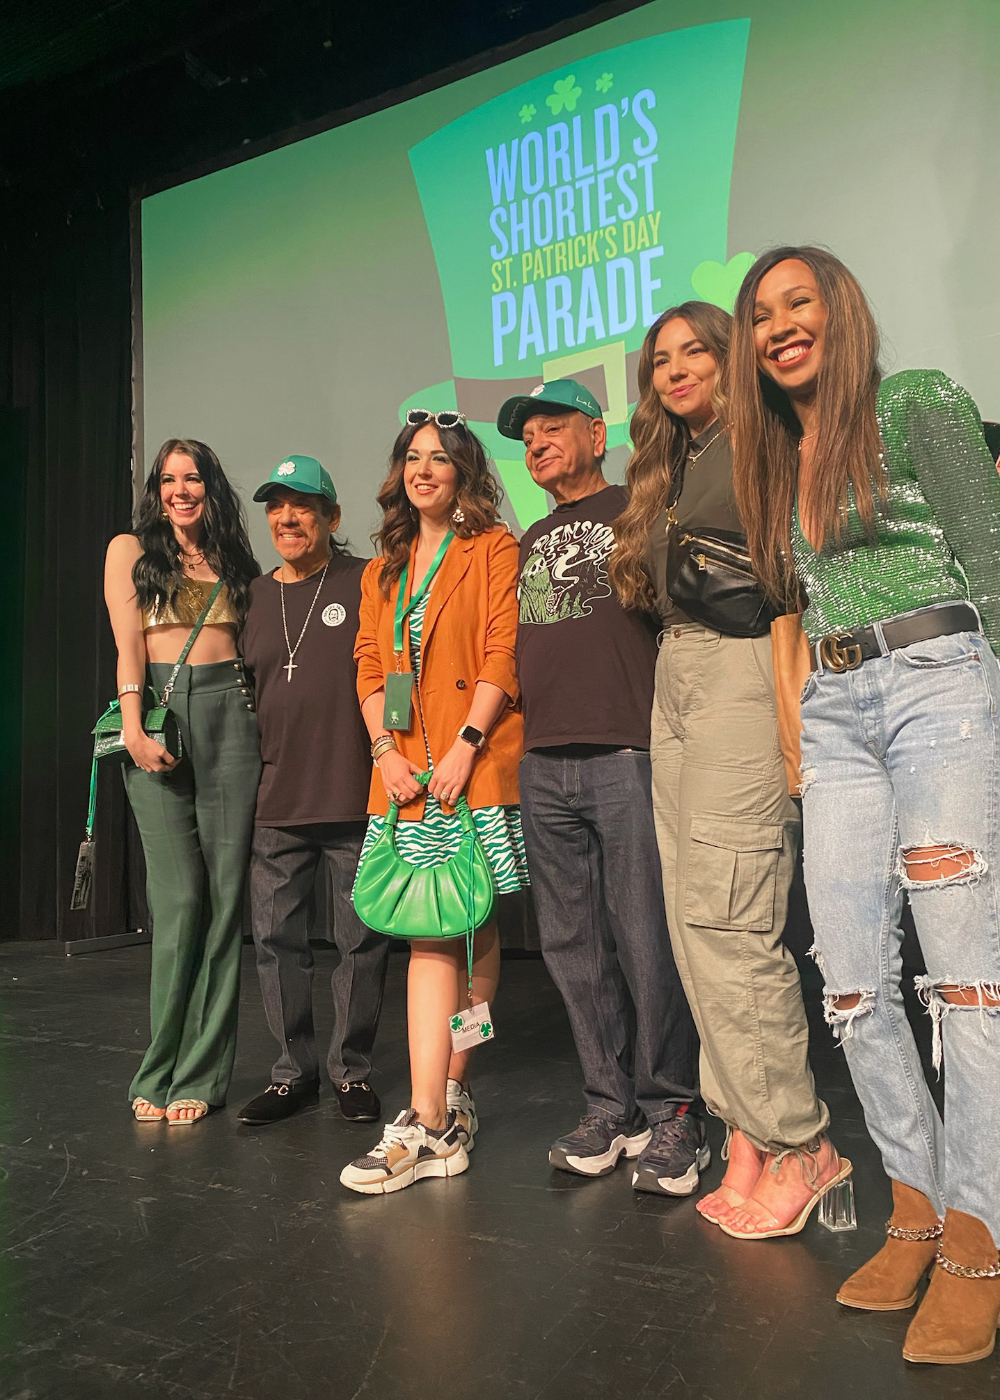 Greta Holla, Danny Trejo, JEssica Moore, Danny Trejo, Lauryn Hock, and Iesha Vincent at the VIP Luncheon of The World's Shortest St. Patricks Day Parade in Hot Springs, Arkansas